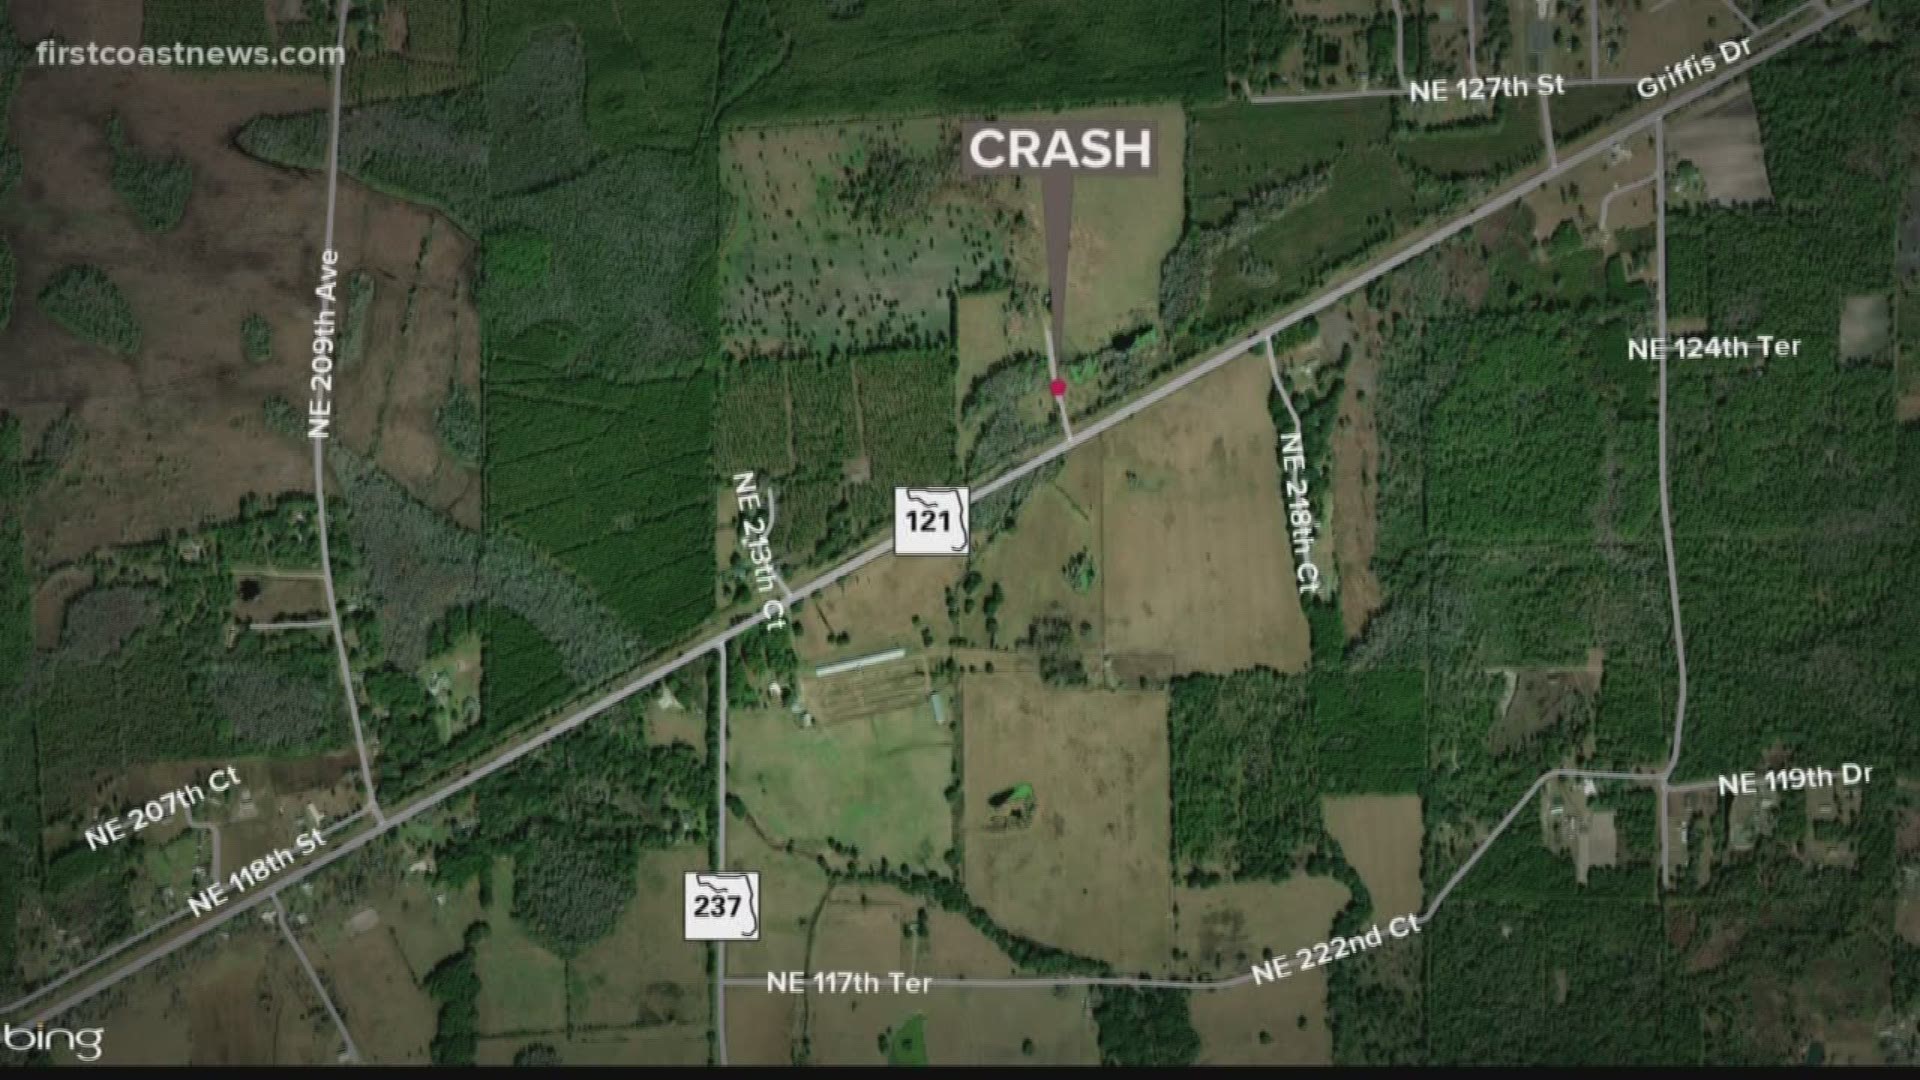 Two 13-year-old girls sustained serious injuries after two ATV's crashed into each other on Saturday, according to a report from Florida Highway Patrol.